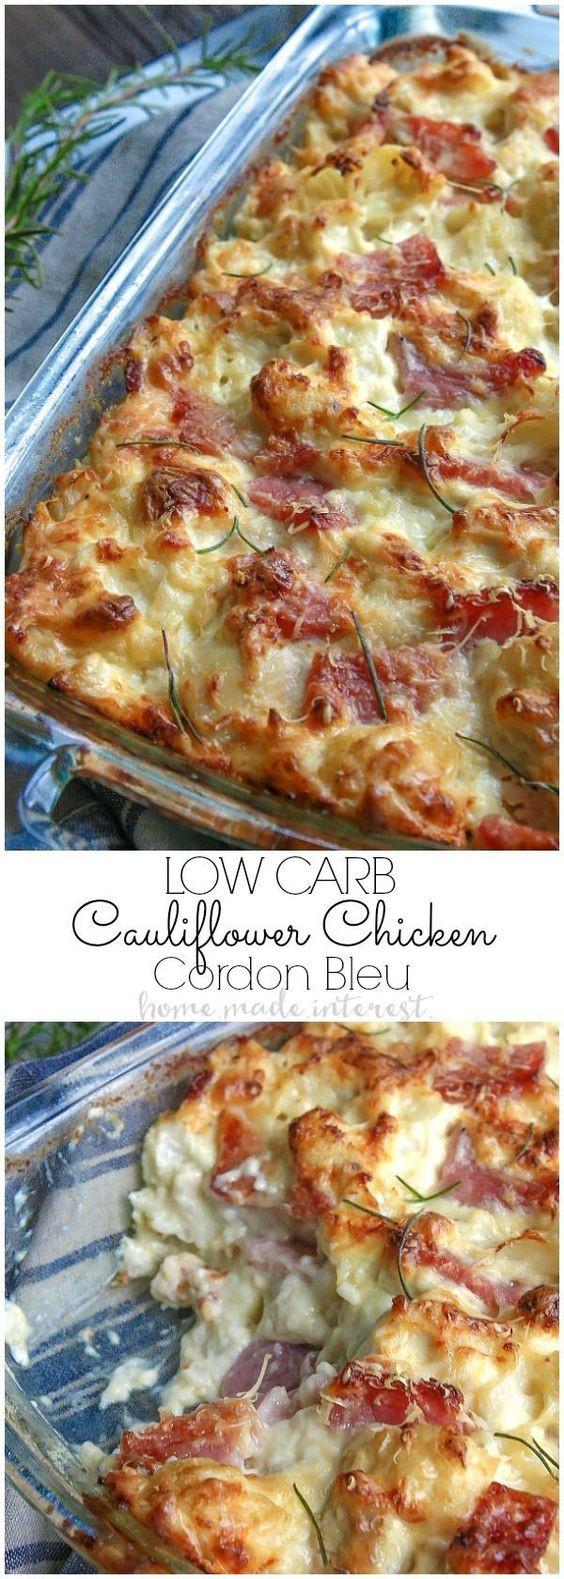 Low Carb Canned Chicken Recipes Best Of 32 Canned Chicken Recipes for Delicious Meals You Ll Use